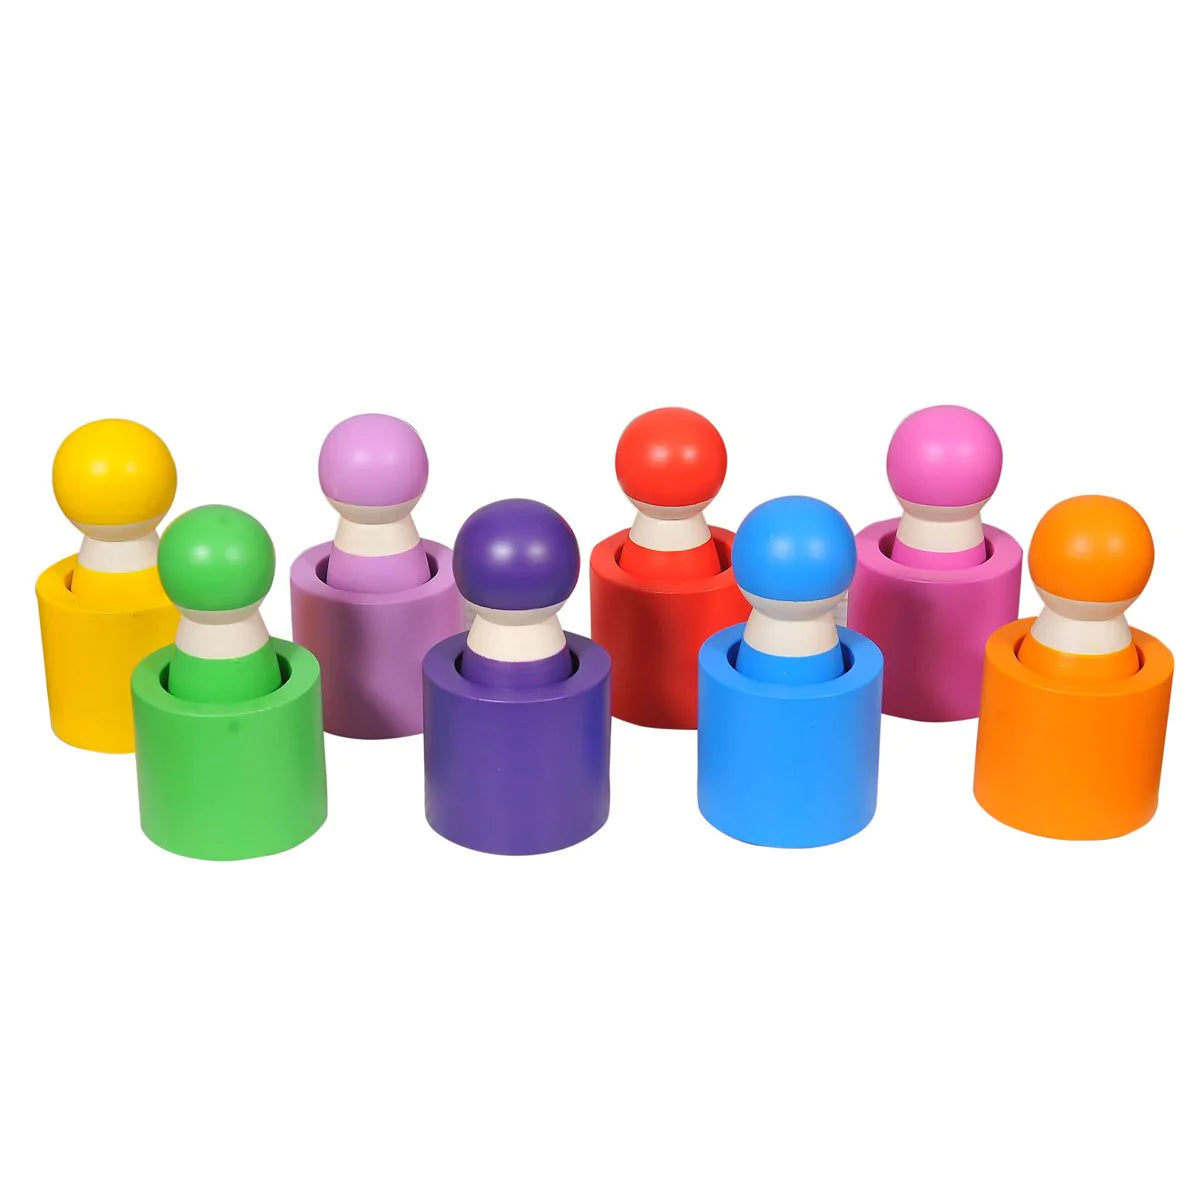 Buy Thasvi Pegs And Cups Wooden Toy - SkilloToys.com